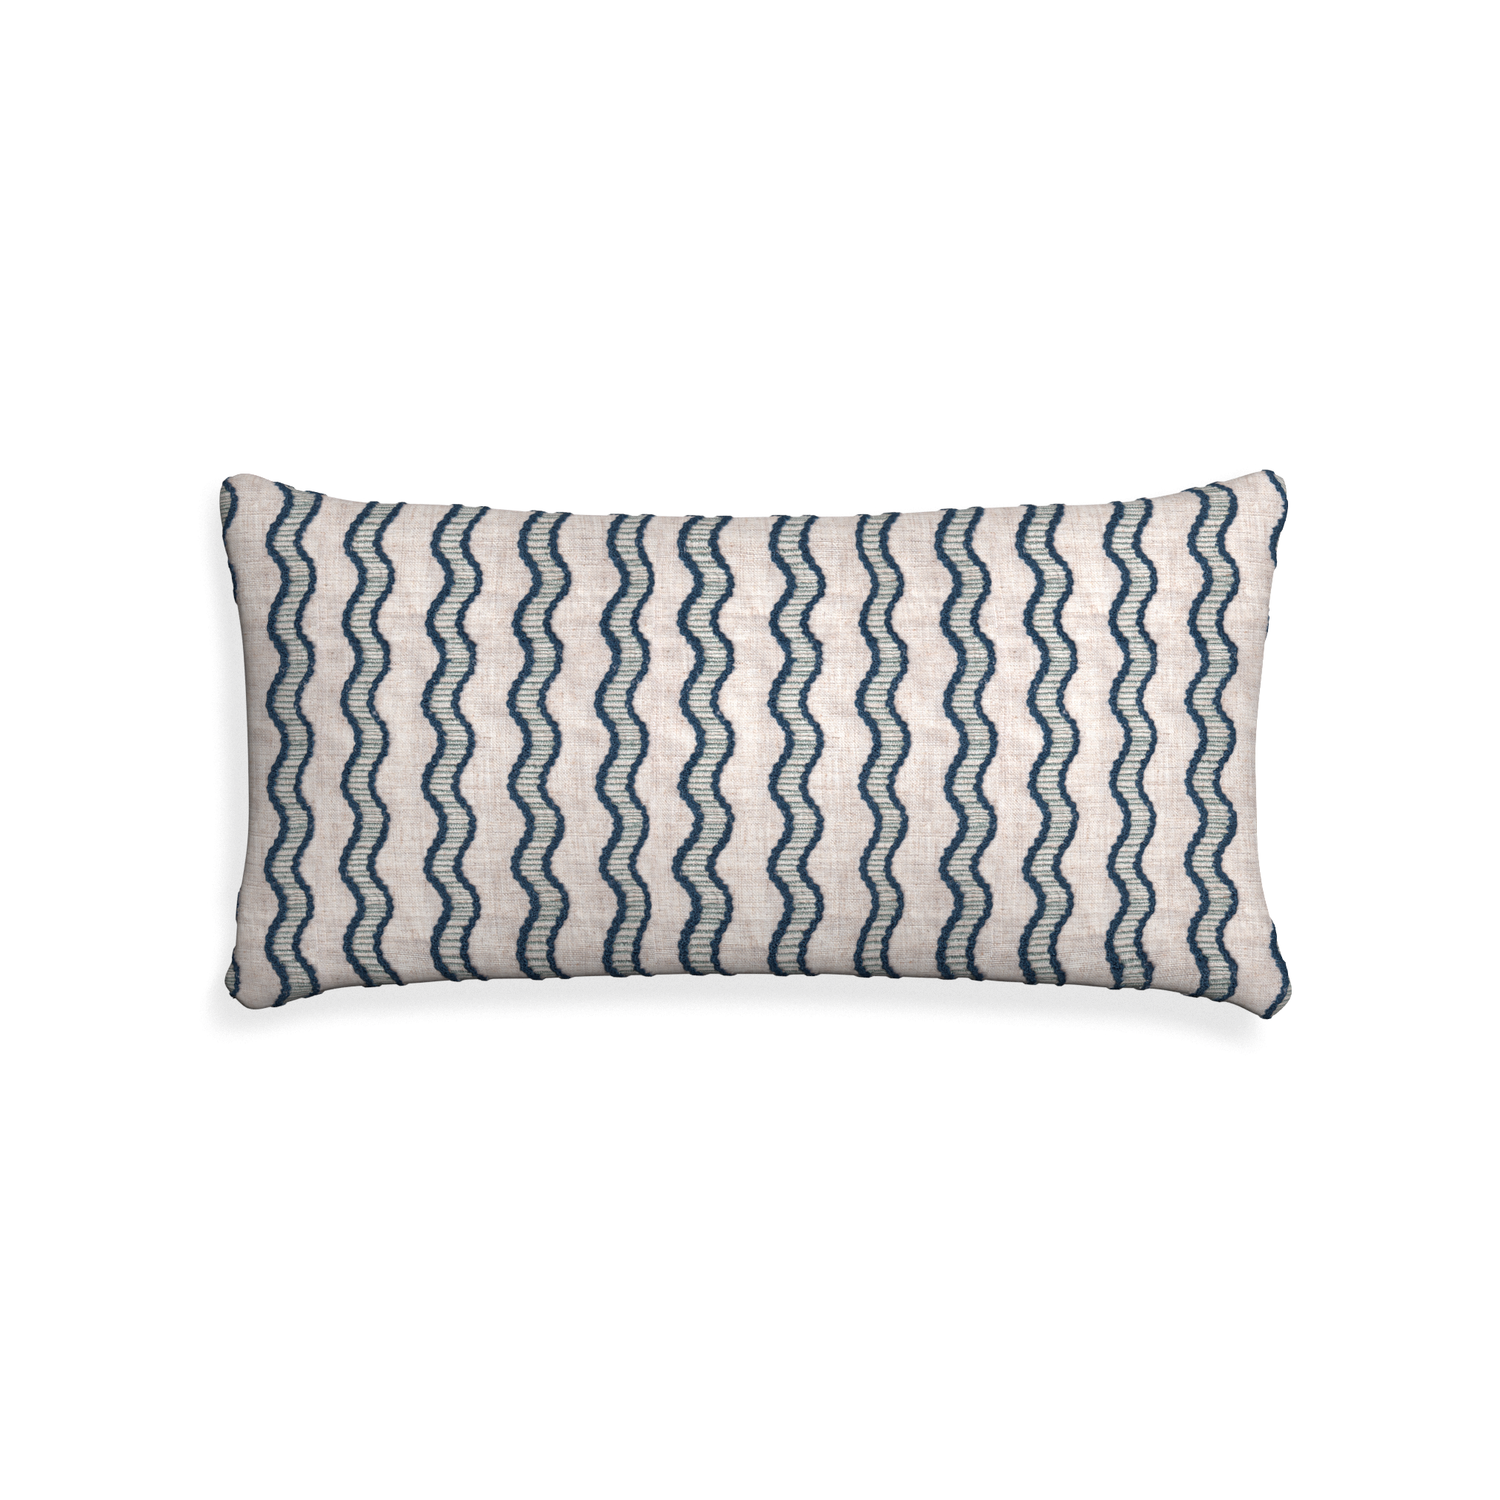 Midi-lumbar beatrice custom embroidered wavepillow with none on white background